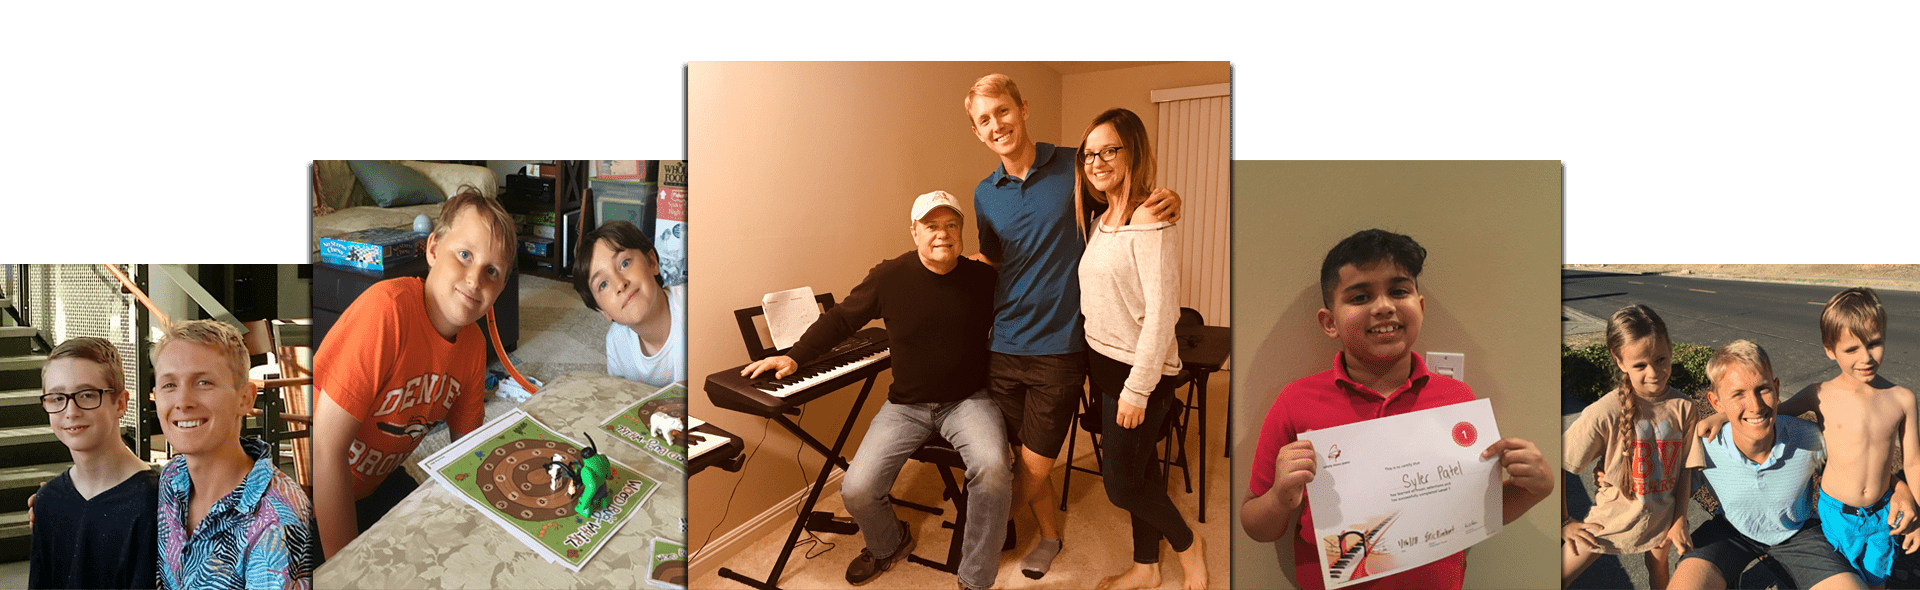 Eric Rinehart's offers mobile piano lessons in your home. For those in Orange County, you are in luck to a new breakthough piano method known as Simply Music offered in the comfort of your own home.